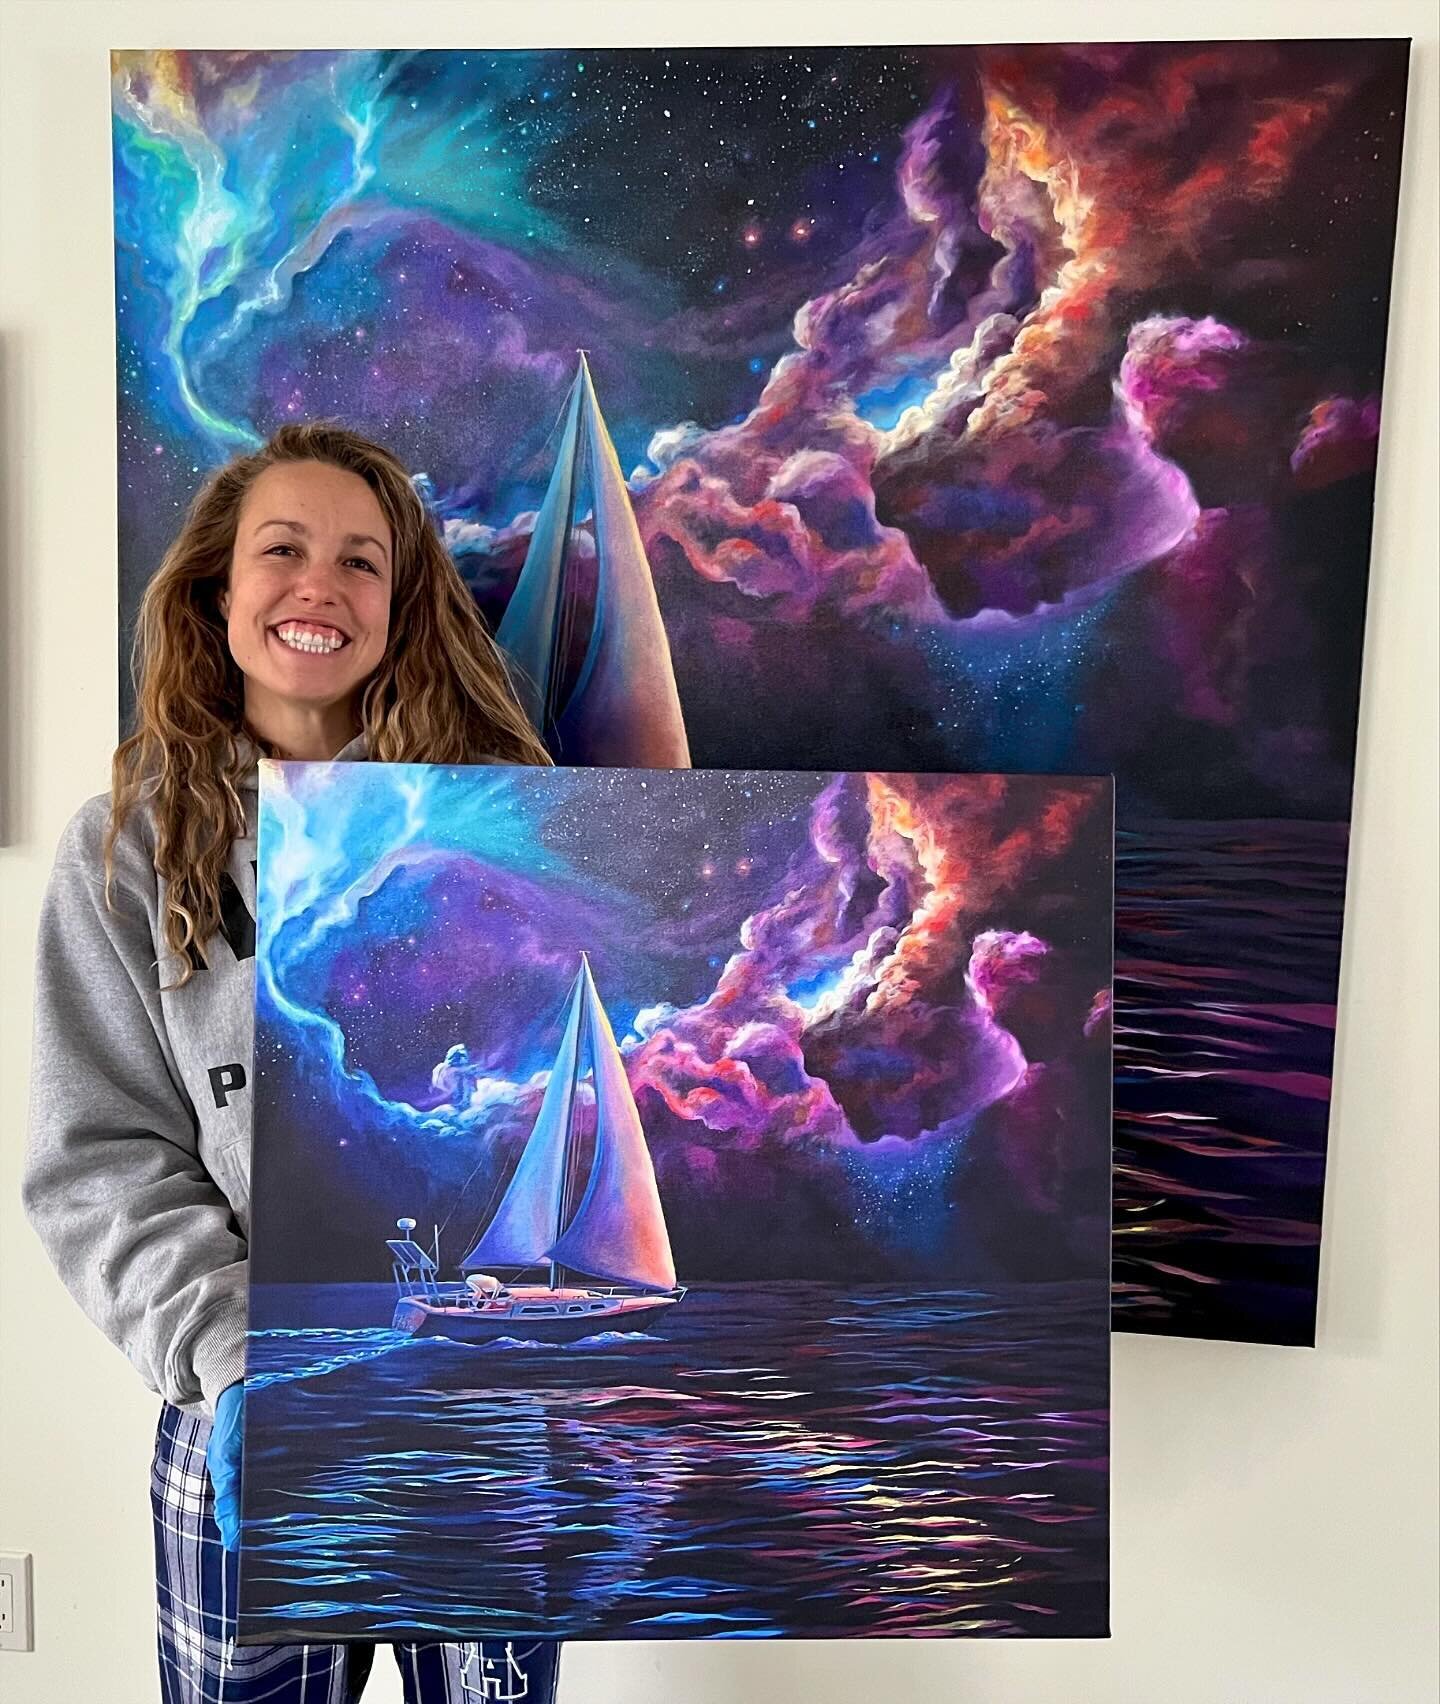 24x24 canvas prints of &ldquo;Sailing through Darkness&rdquo; came in on this glorious snow day and I was so excited I had to take a sleepy picture in my pajamas to share 😂🥳🤩 This is one of my favorite paintings ever and I&rsquo;m so pumped to off